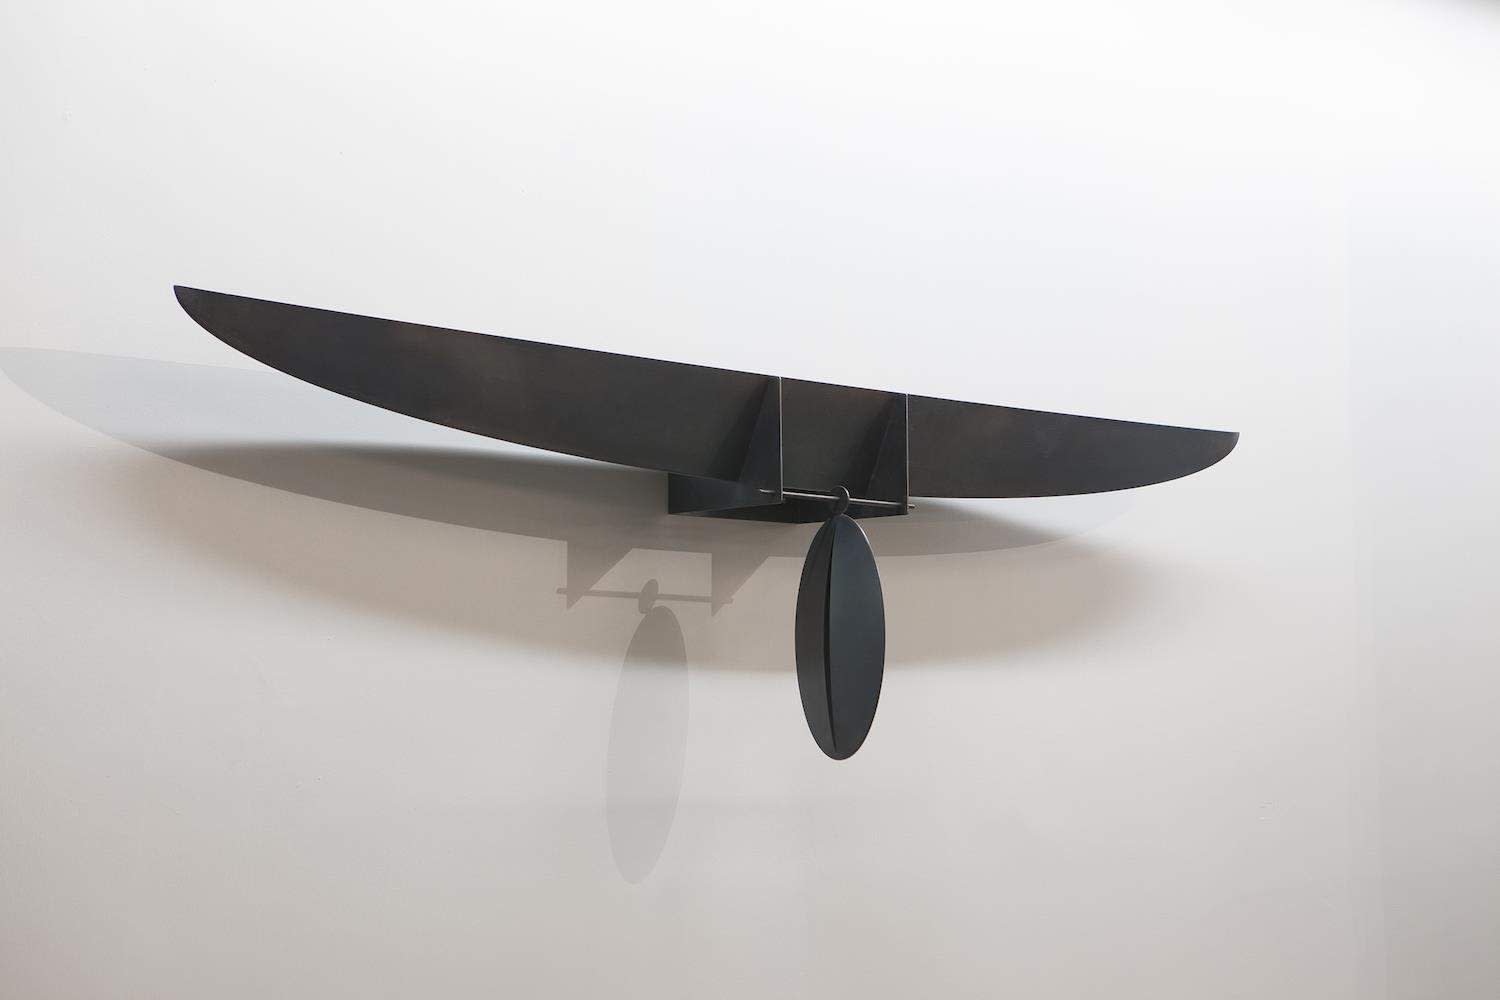 Boat, Stainless Steel, 240 x 61 x 25 cm